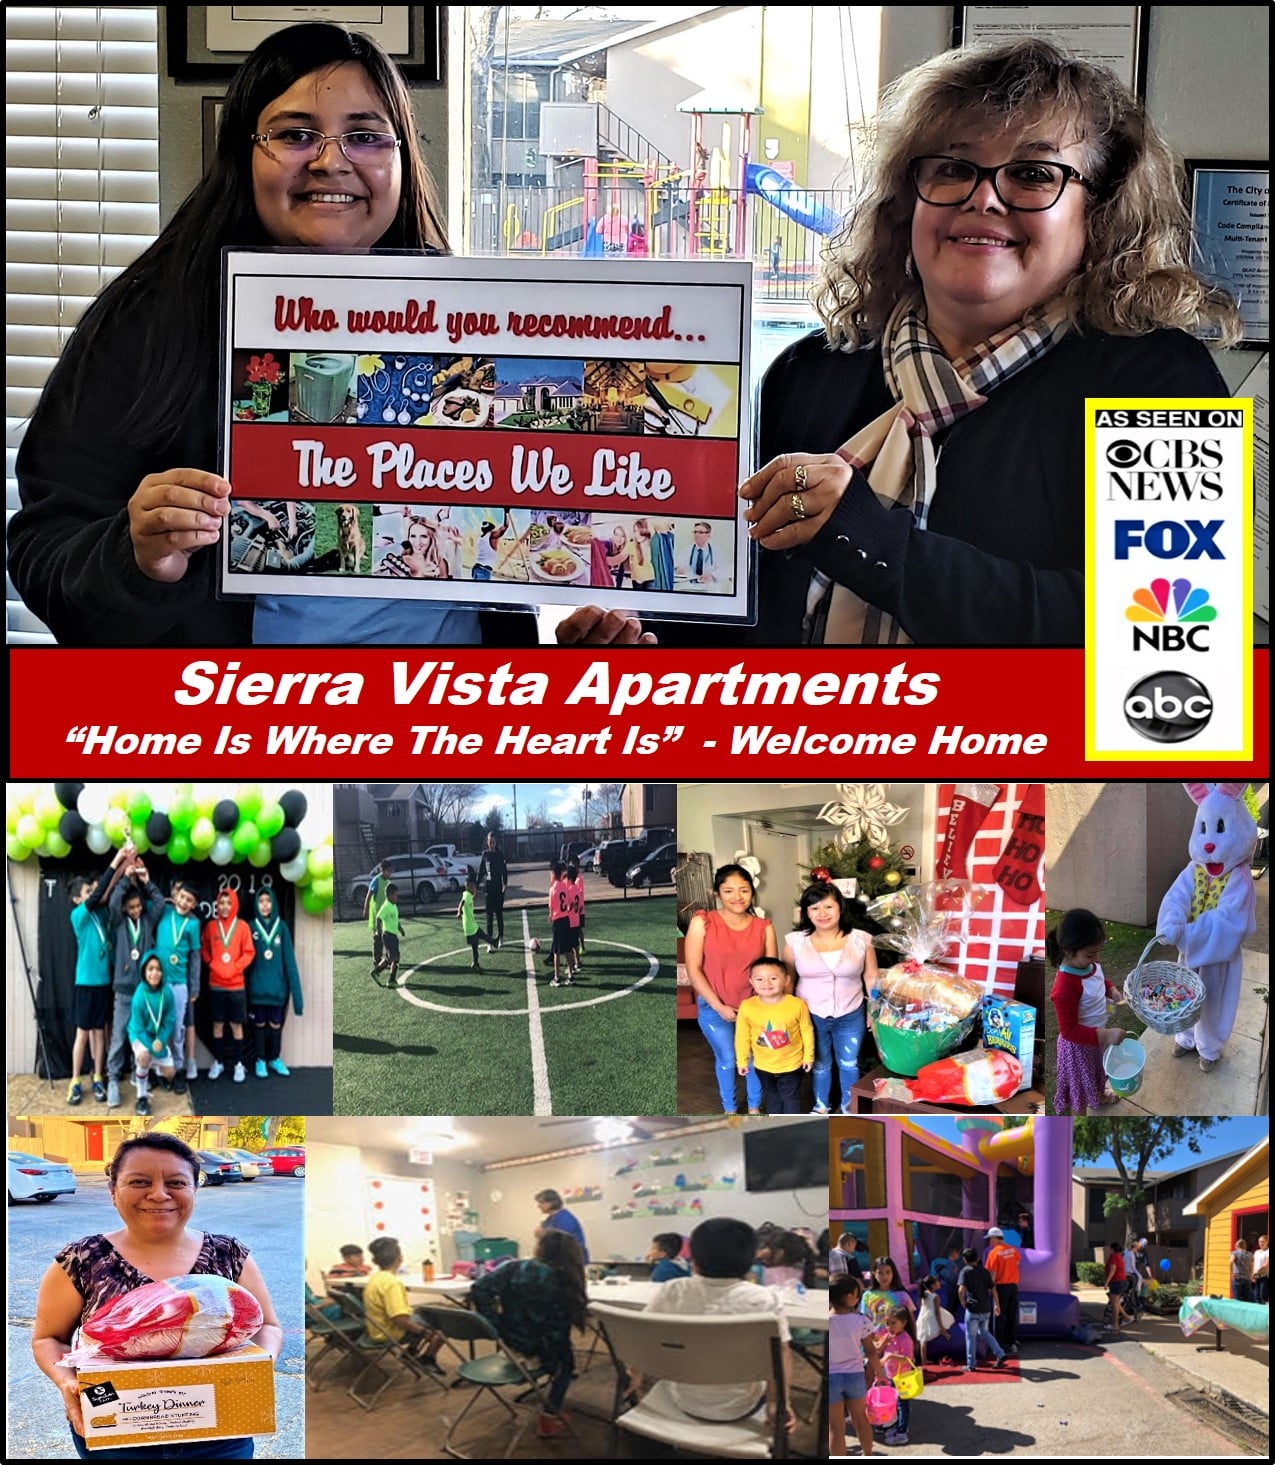 Sierra Vista Apartments In Dallas Texas Was Just Recognized By The ...